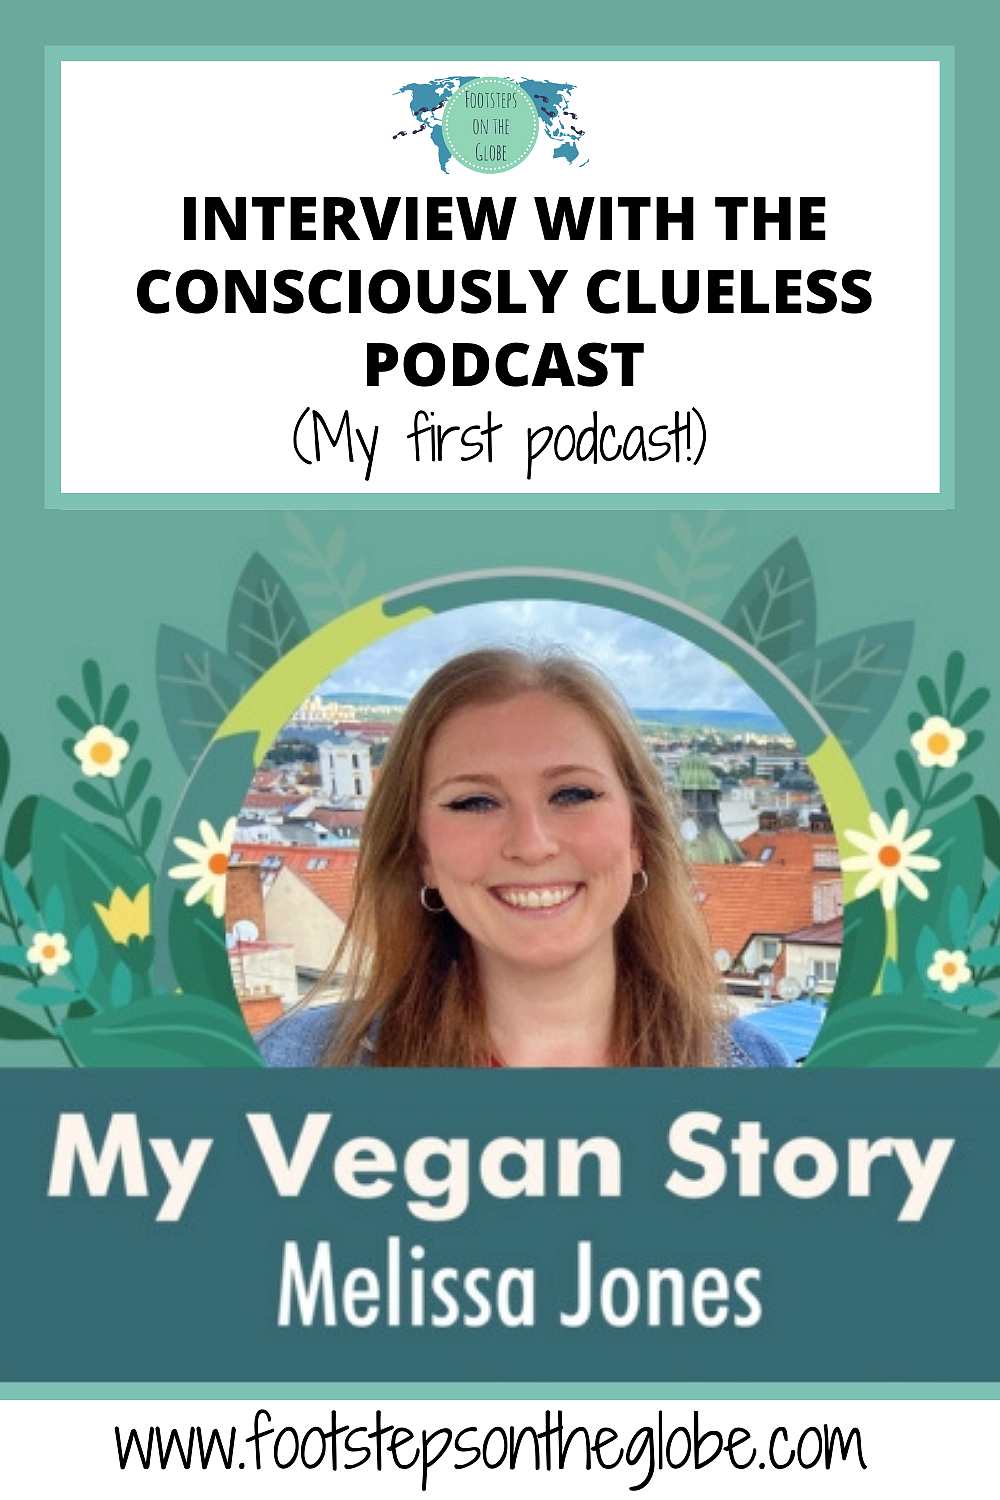 Pinterest image of Mel smiling with the text: "Interview with the Consciously Clueless Podcast (my first podcast)"